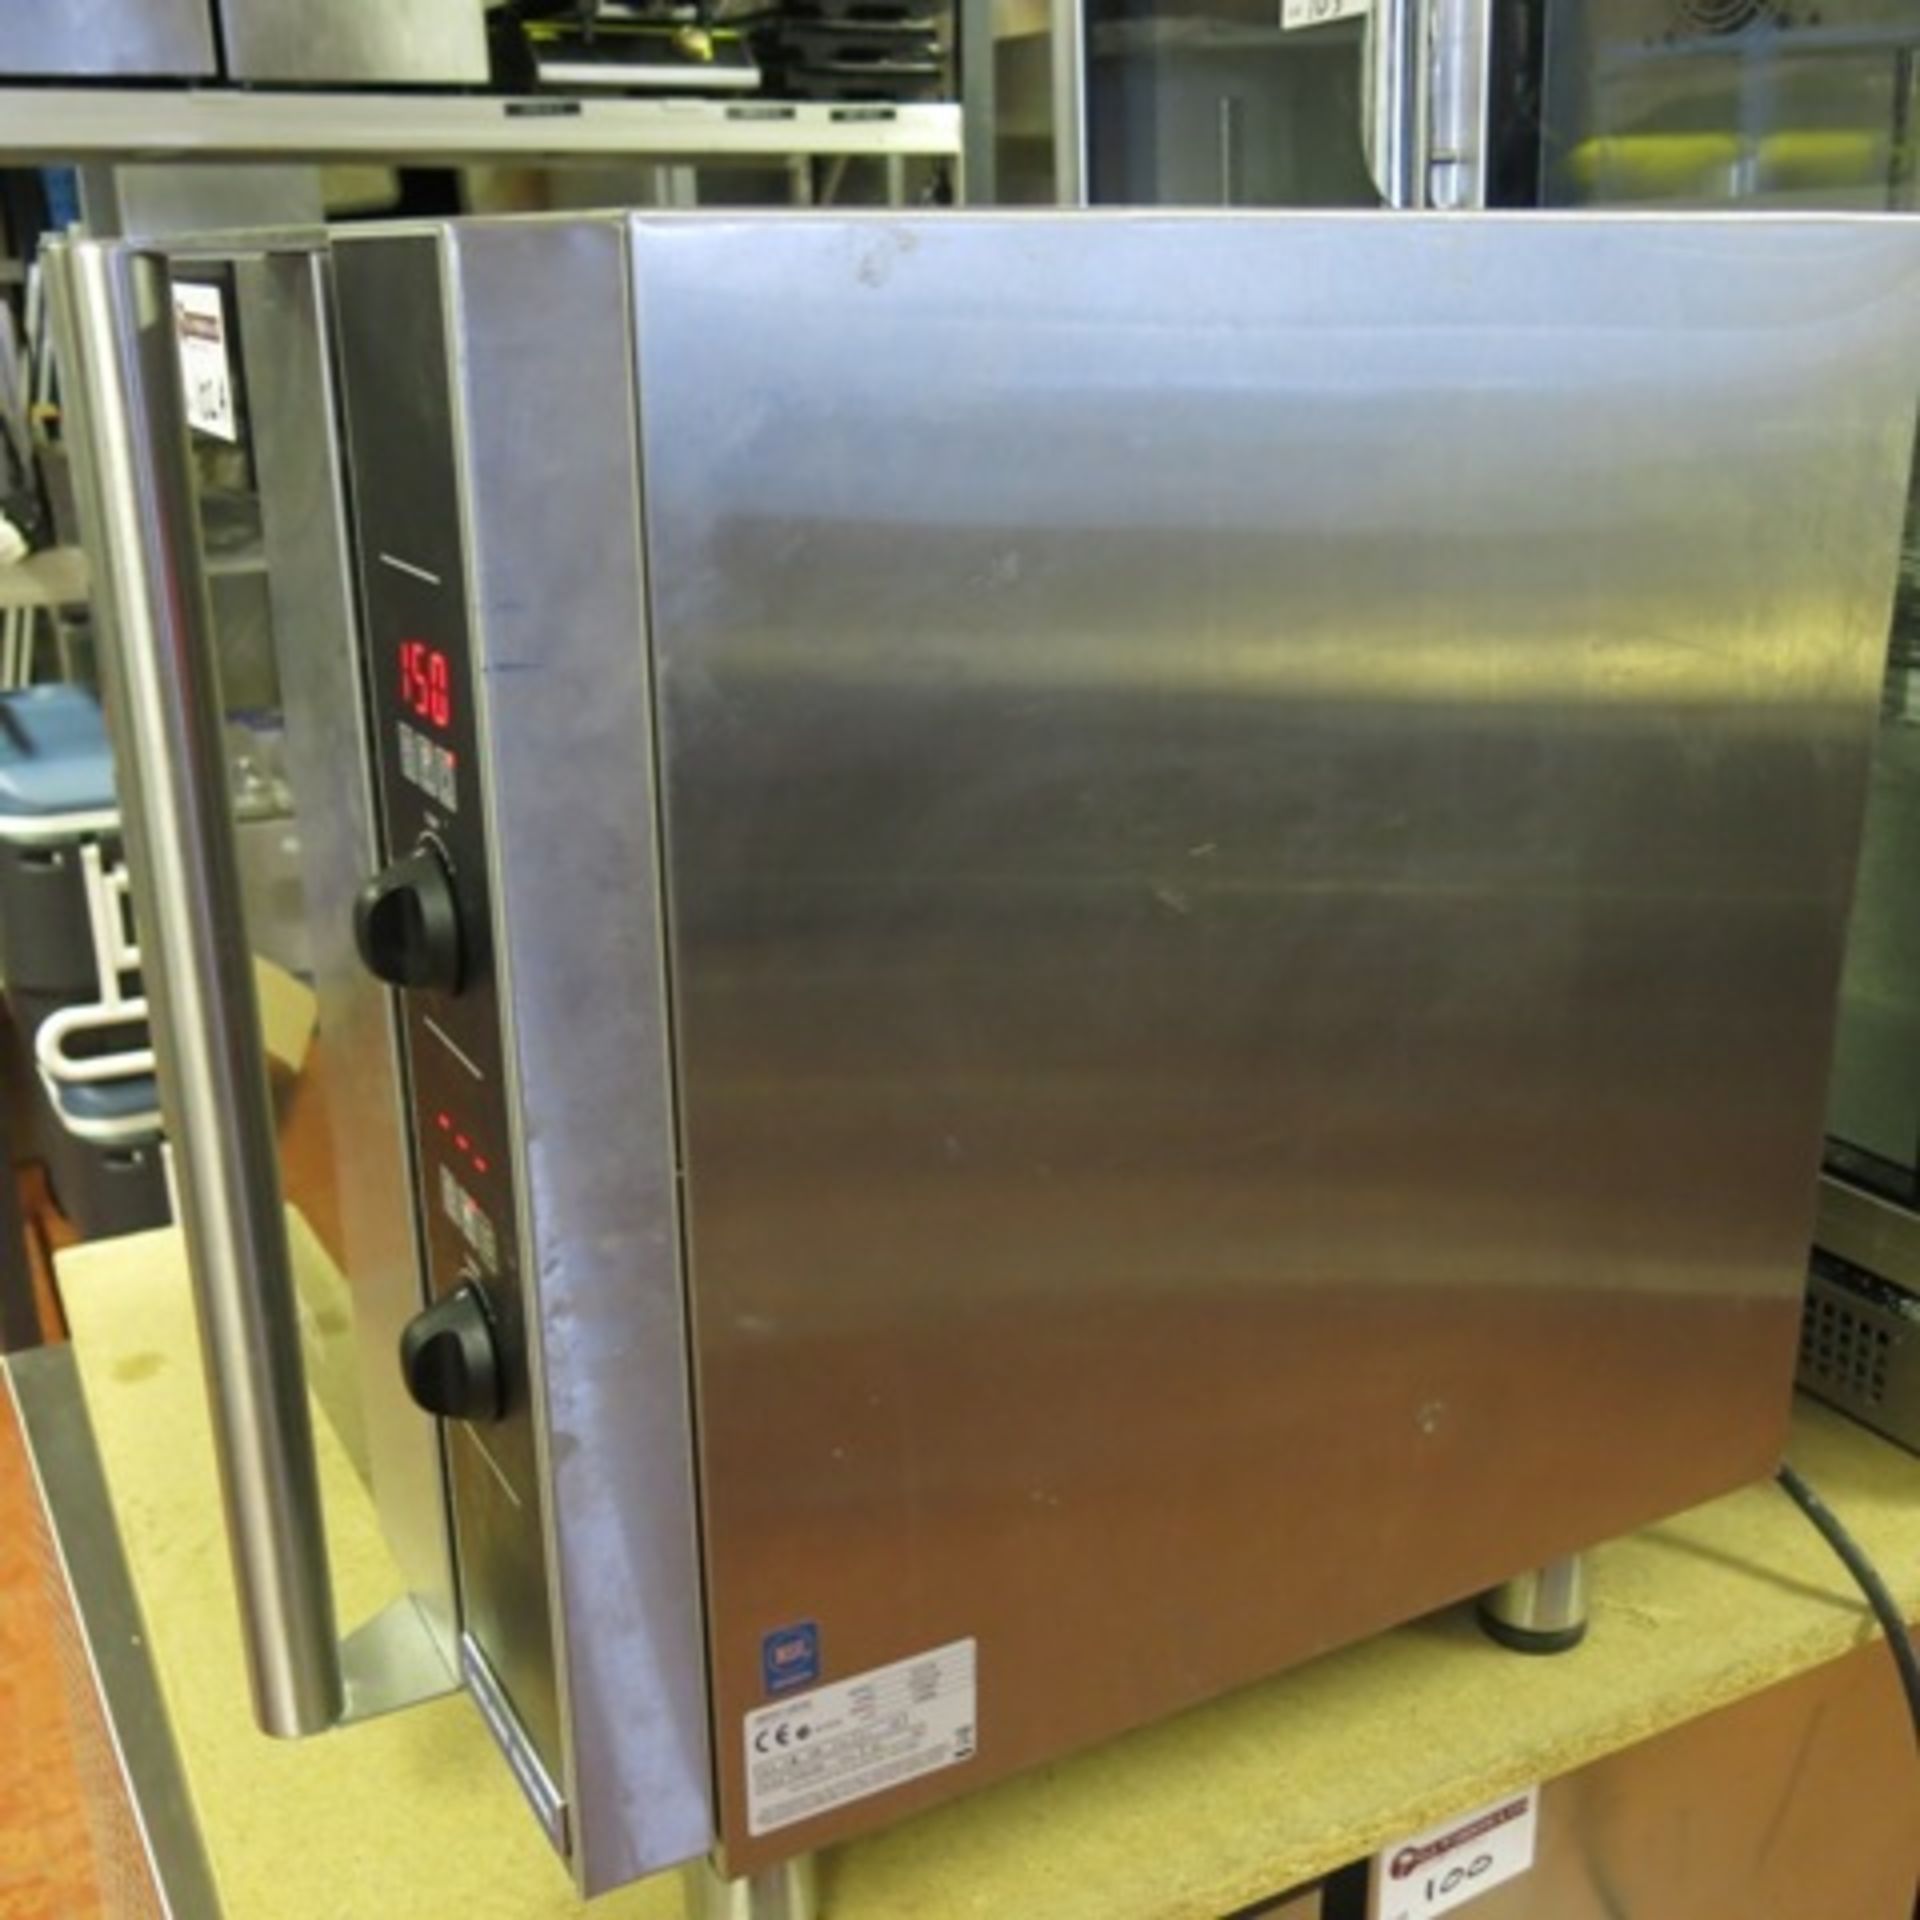 Blue Seal Turbo Digital Electric Convection Oven. Model E31D4. Size (H) 63 x (W) 81 x (D) 70cm - Image 5 of 6